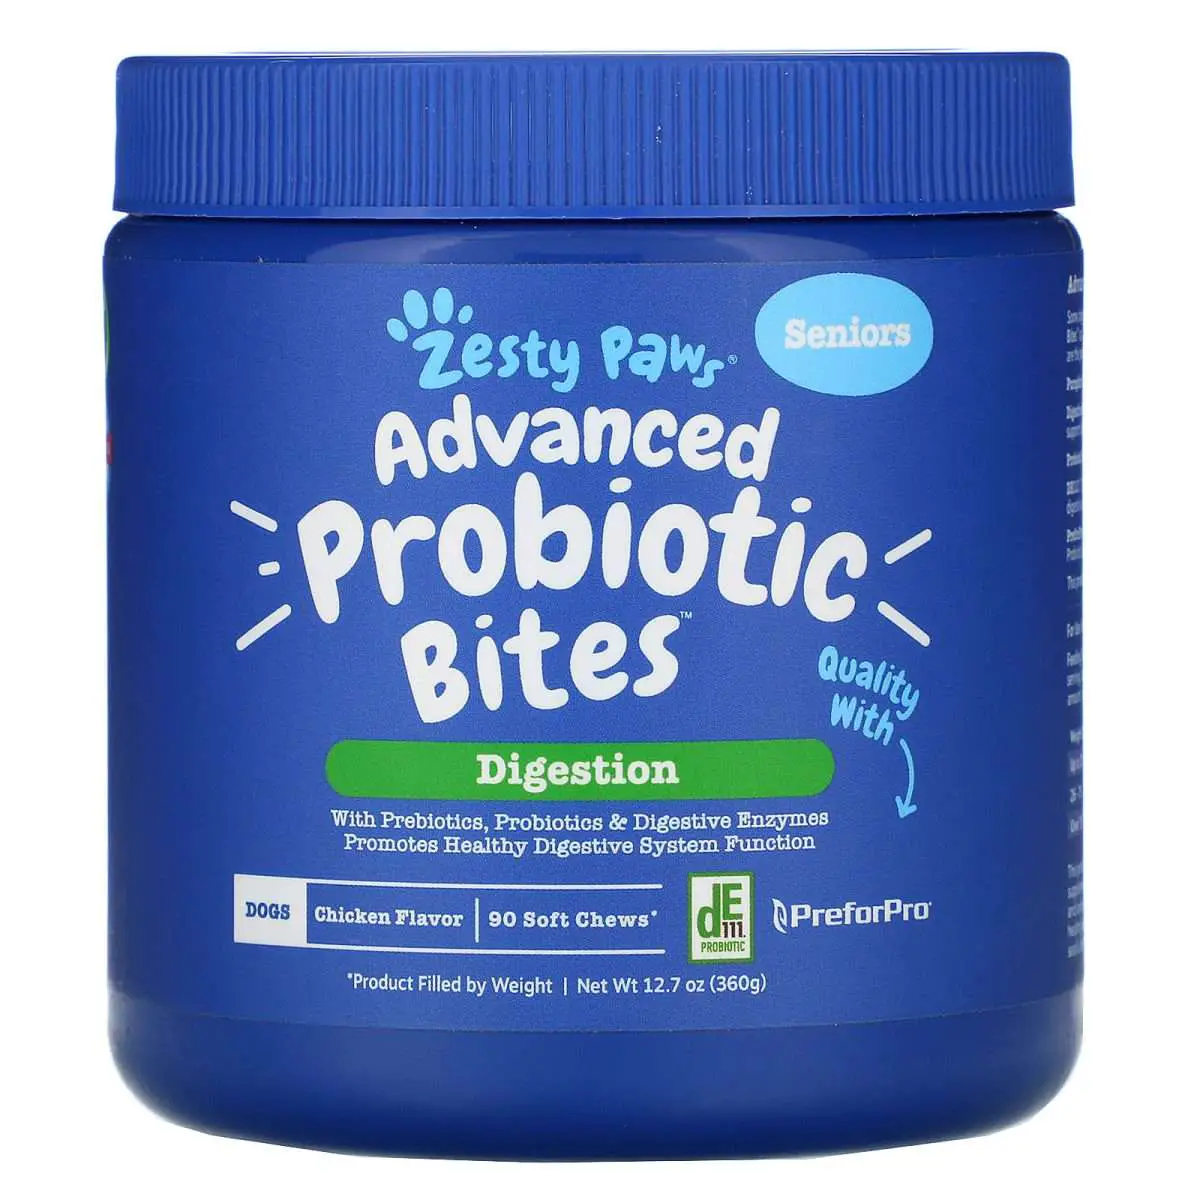 Zesty Paws, Advanced Probiotic Bites for Dogs, Digestion, Seniors ...